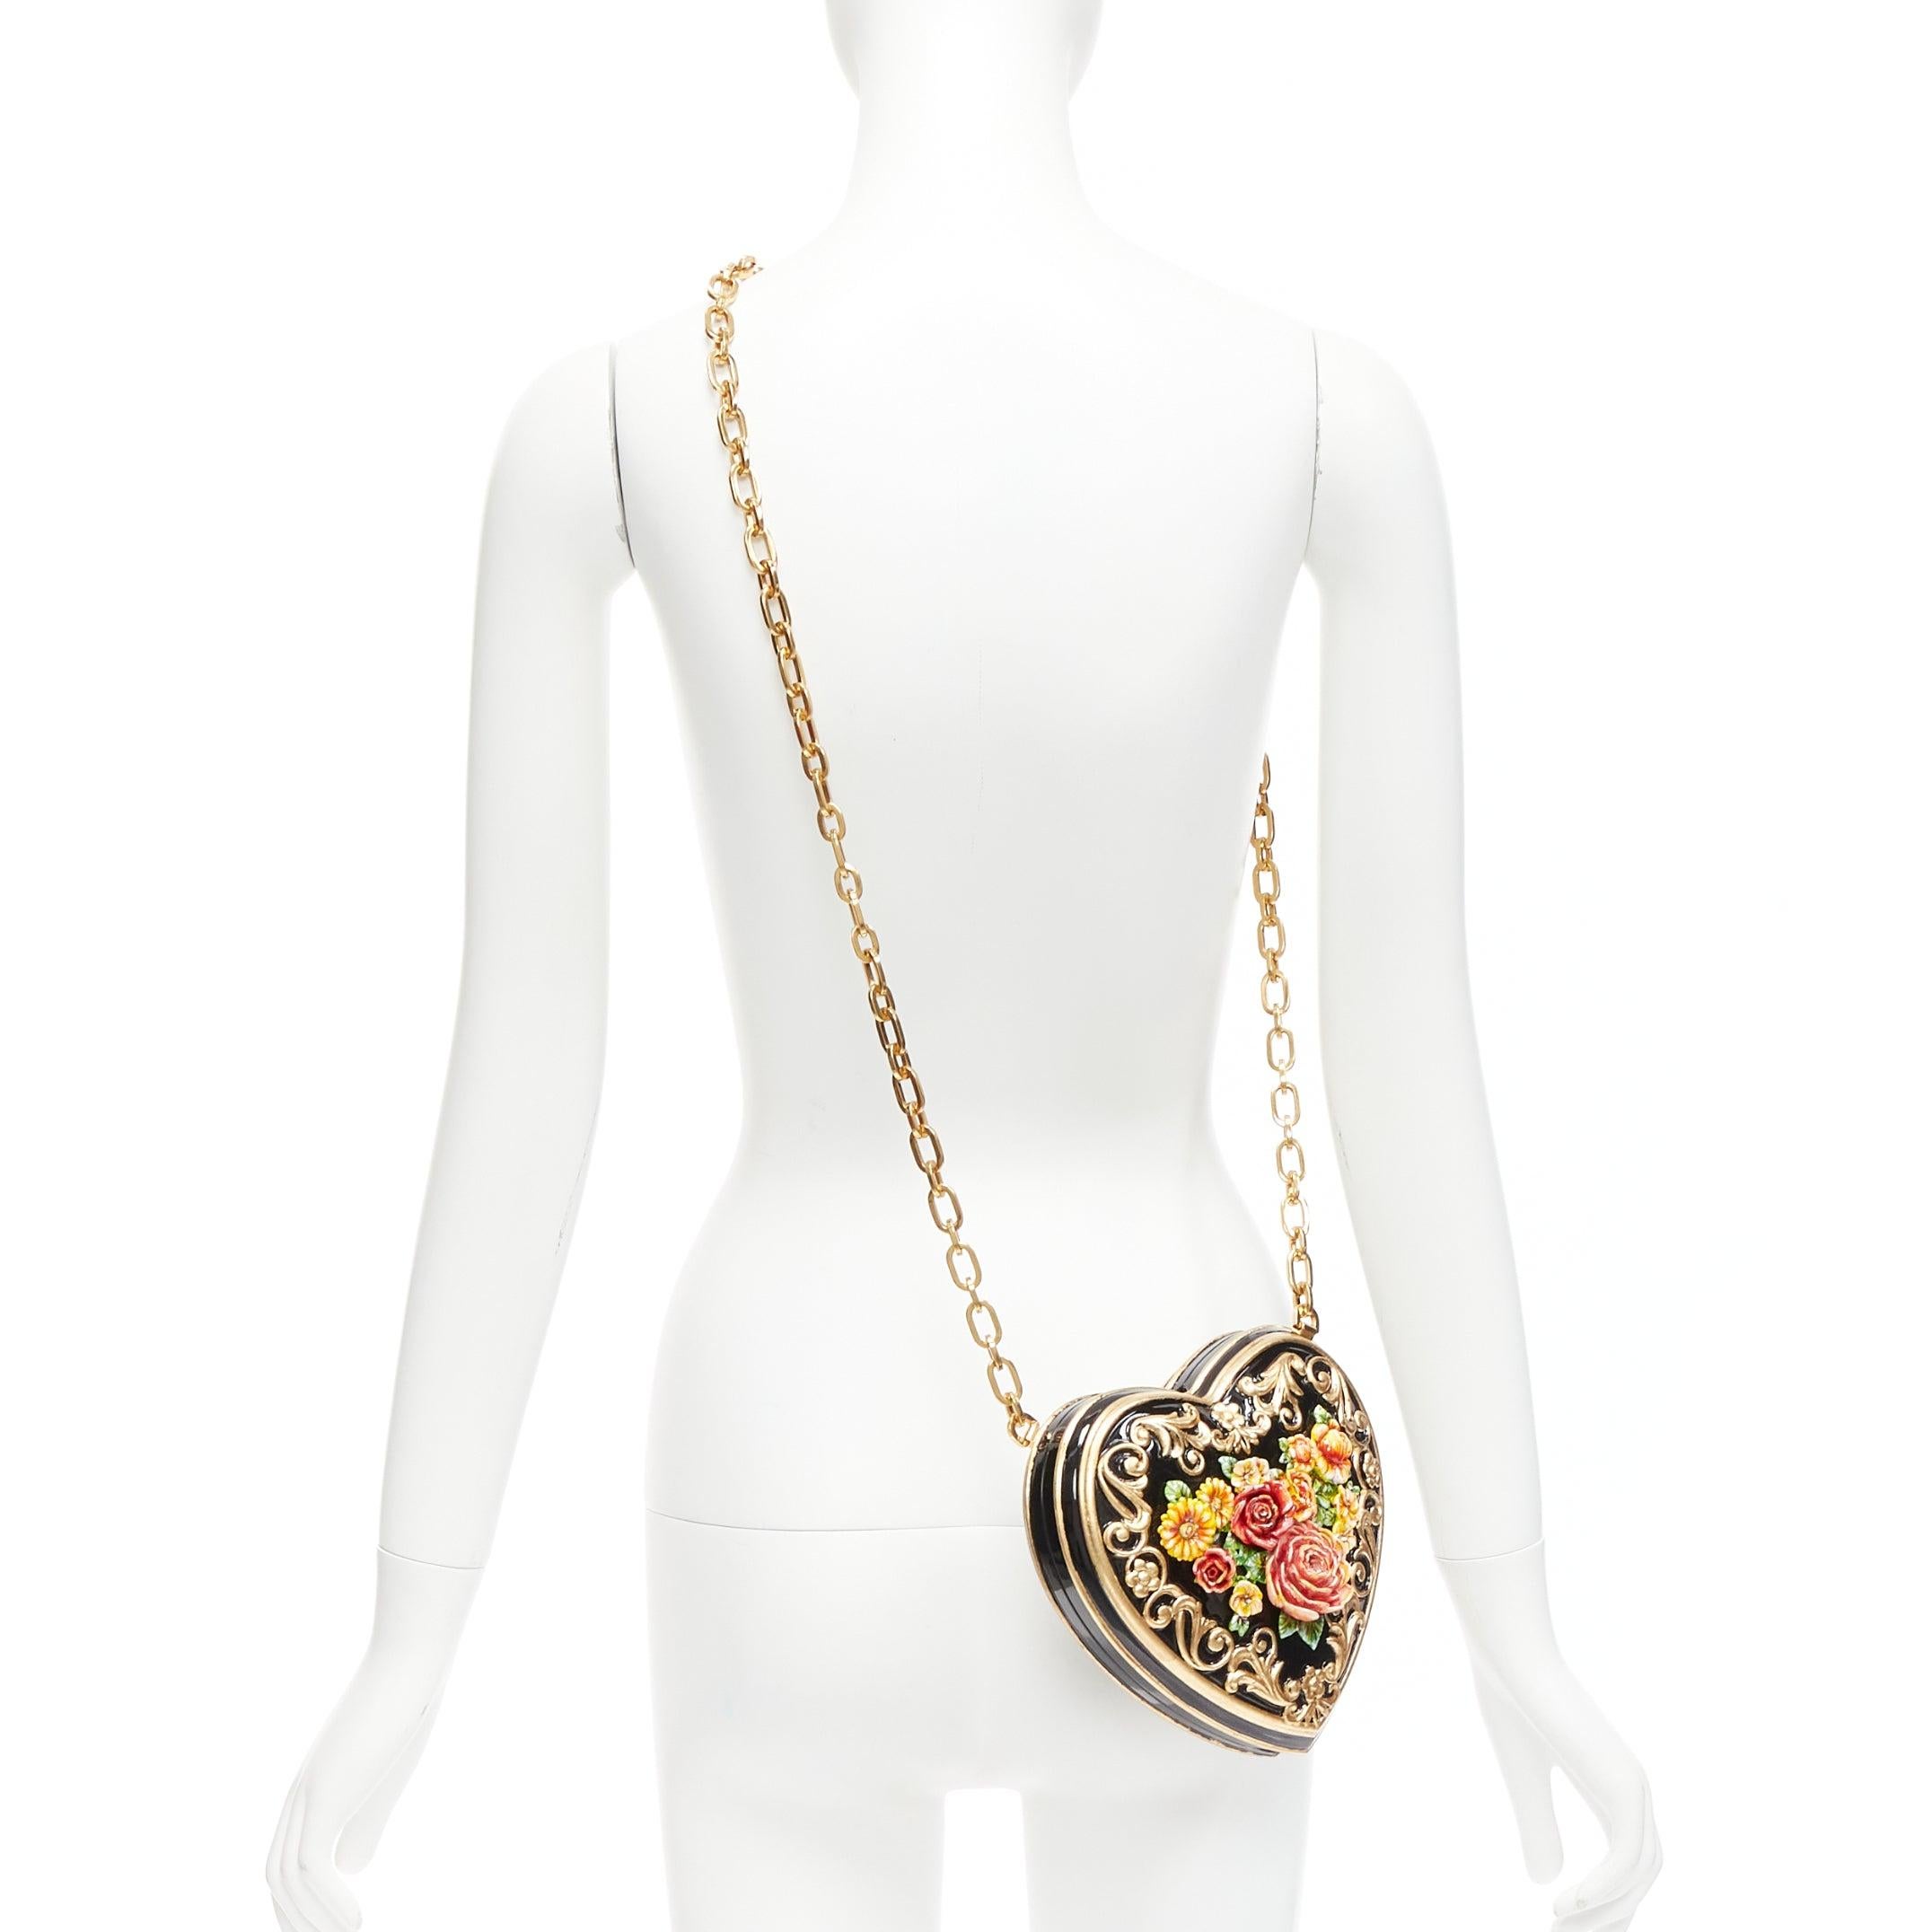 DOLCE GABBANA Runway Baroque Painted black gold red roses heart box chain bag
Reference: TGAS/D01028
Brand: Dolce Gabbana
Designer: Domenico Dolce and Stefano Gabbana
Material: Acetate, Metal
Color: Gold, Black
Pattern: Barocco
Closure: